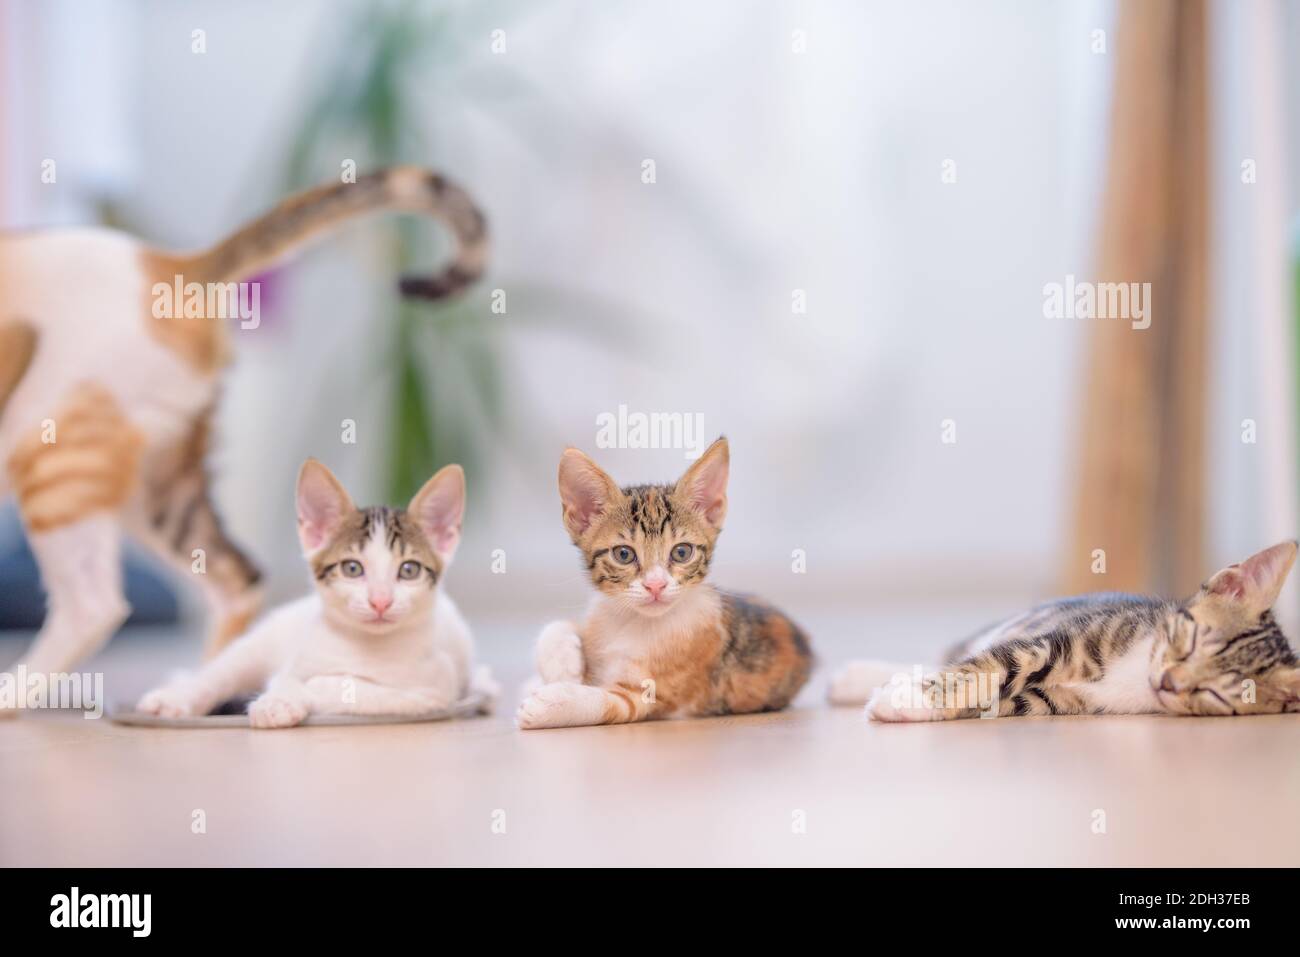 Three kittens on the floor with with mother cat a blurry background Stock Photo